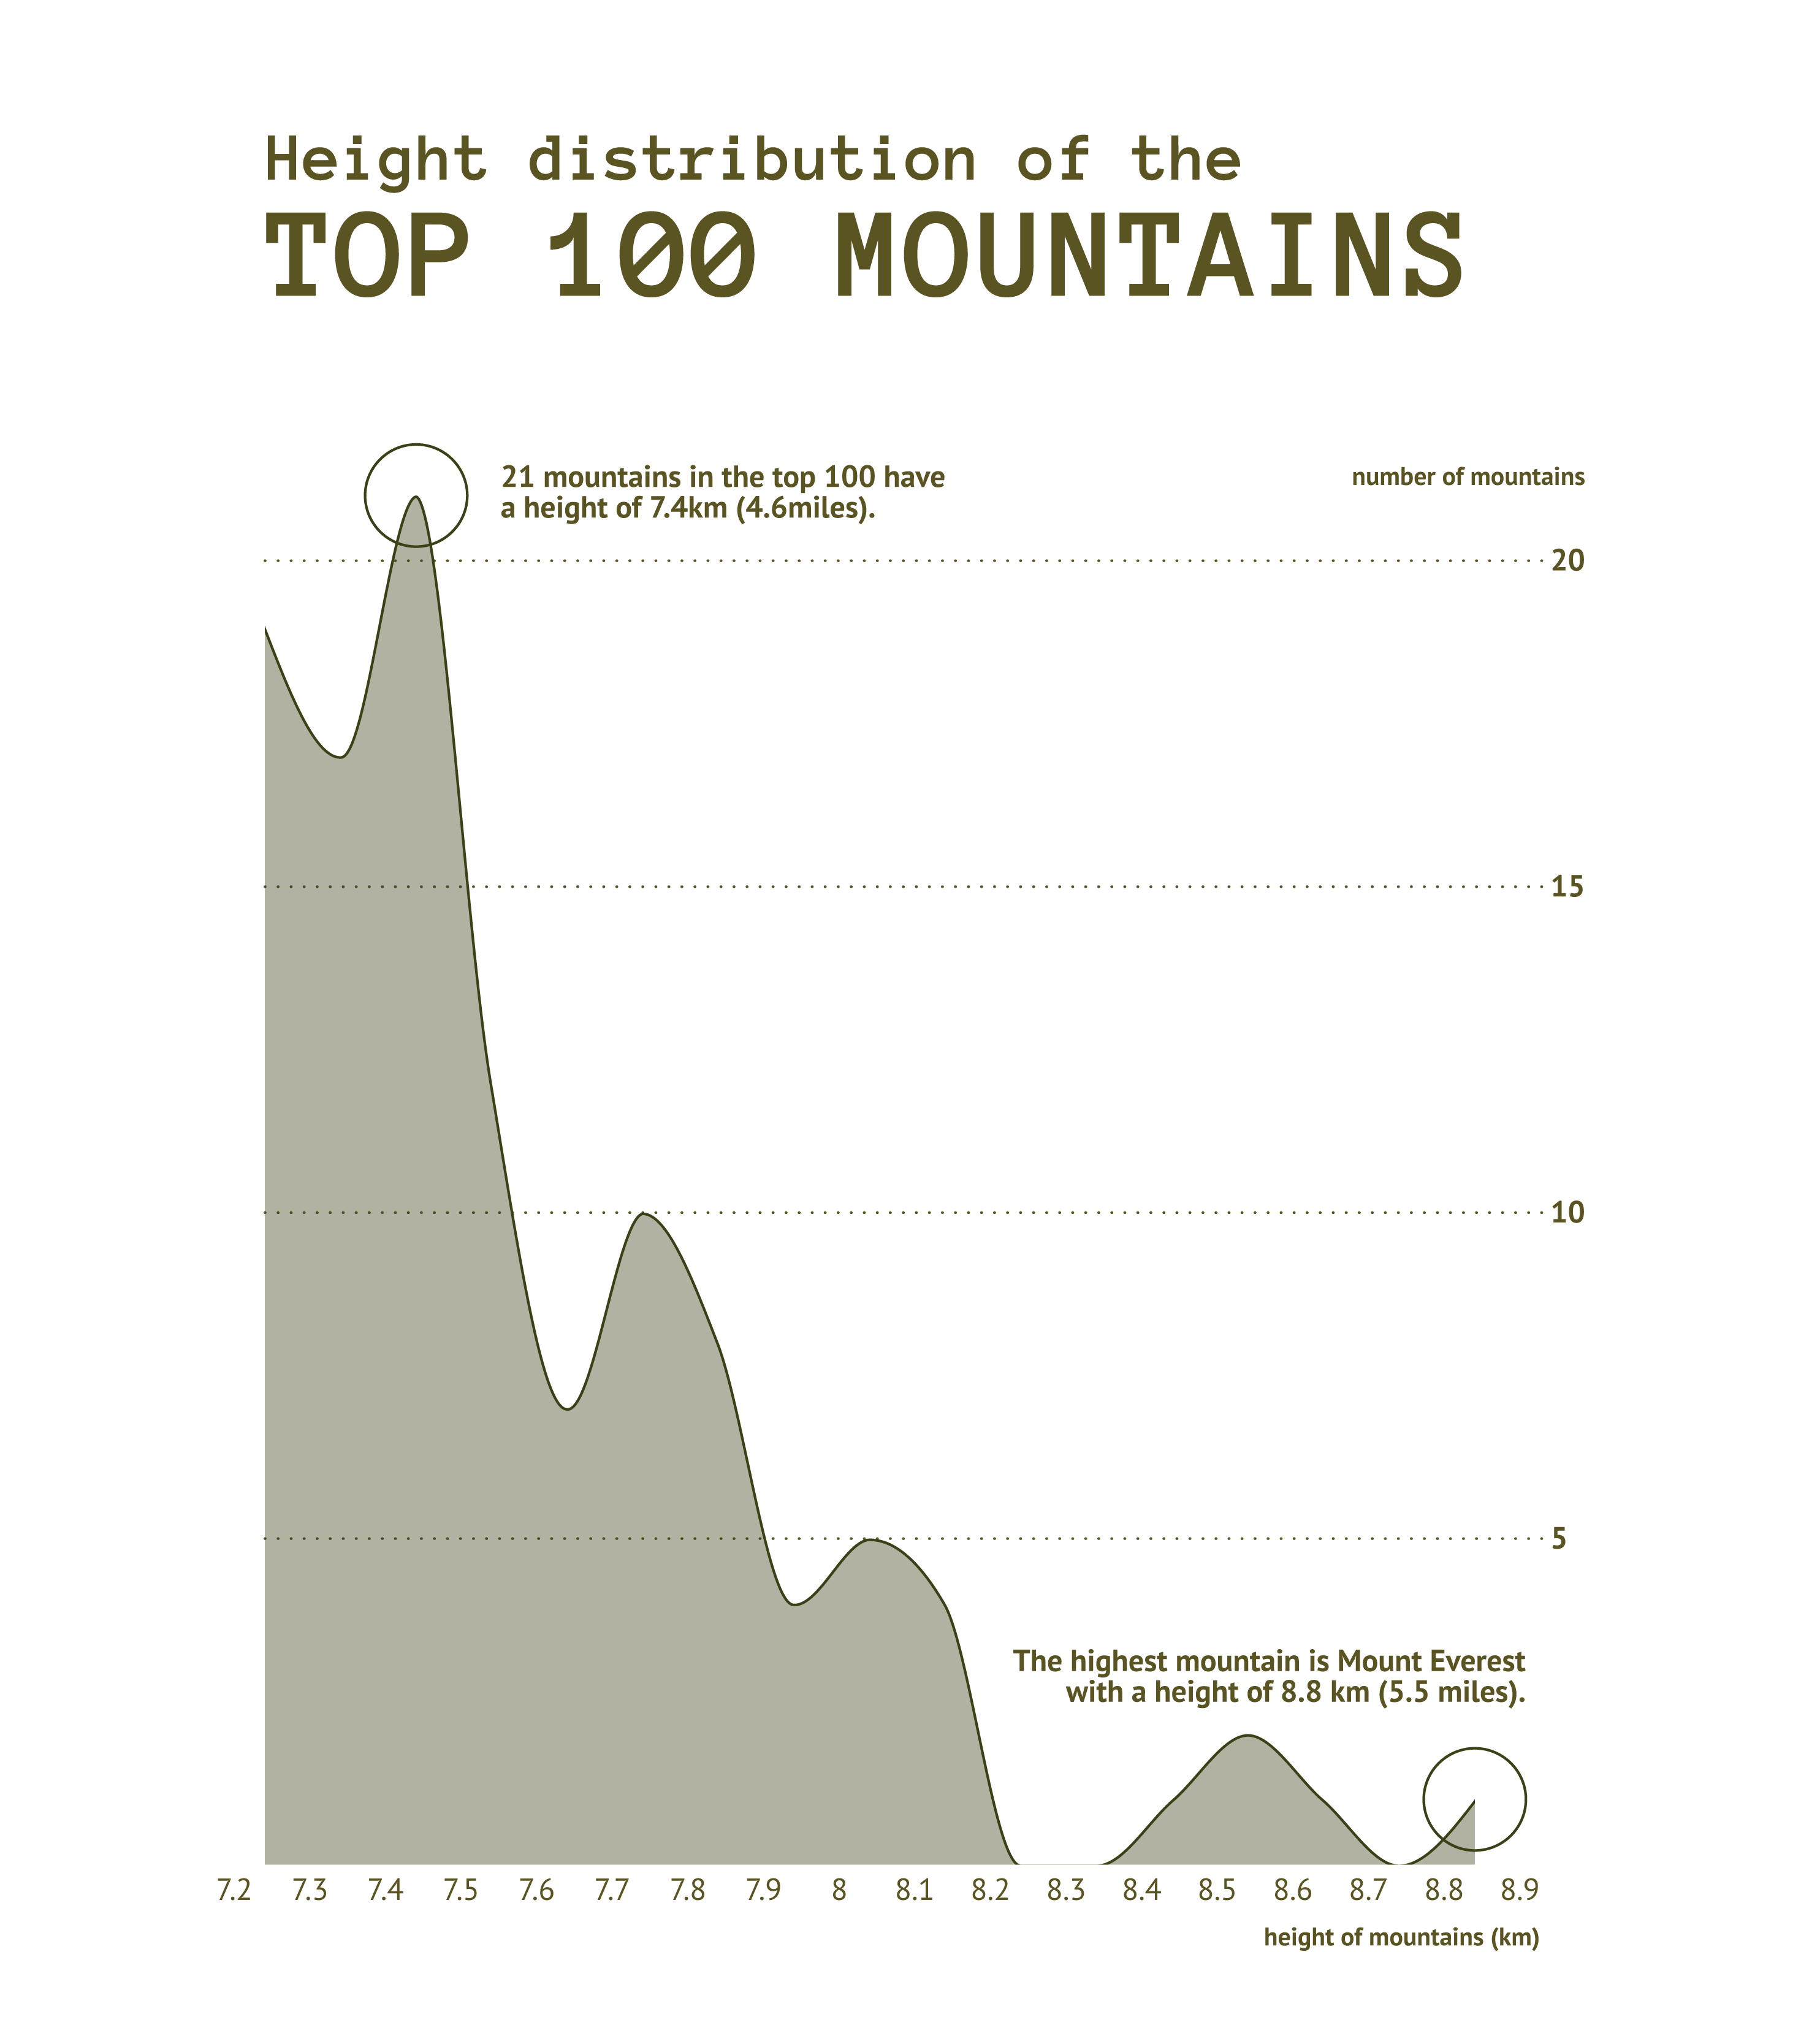 This visualization shows an example of a density plot. This particular chart shows the height distribution of the top 100 mountains. It also annotates that 21 mountains in the top 100 have a height of 7.4km (4.6miles), and that the highest mountain is Mount Everest with a height of 8.8km (5.5miles).